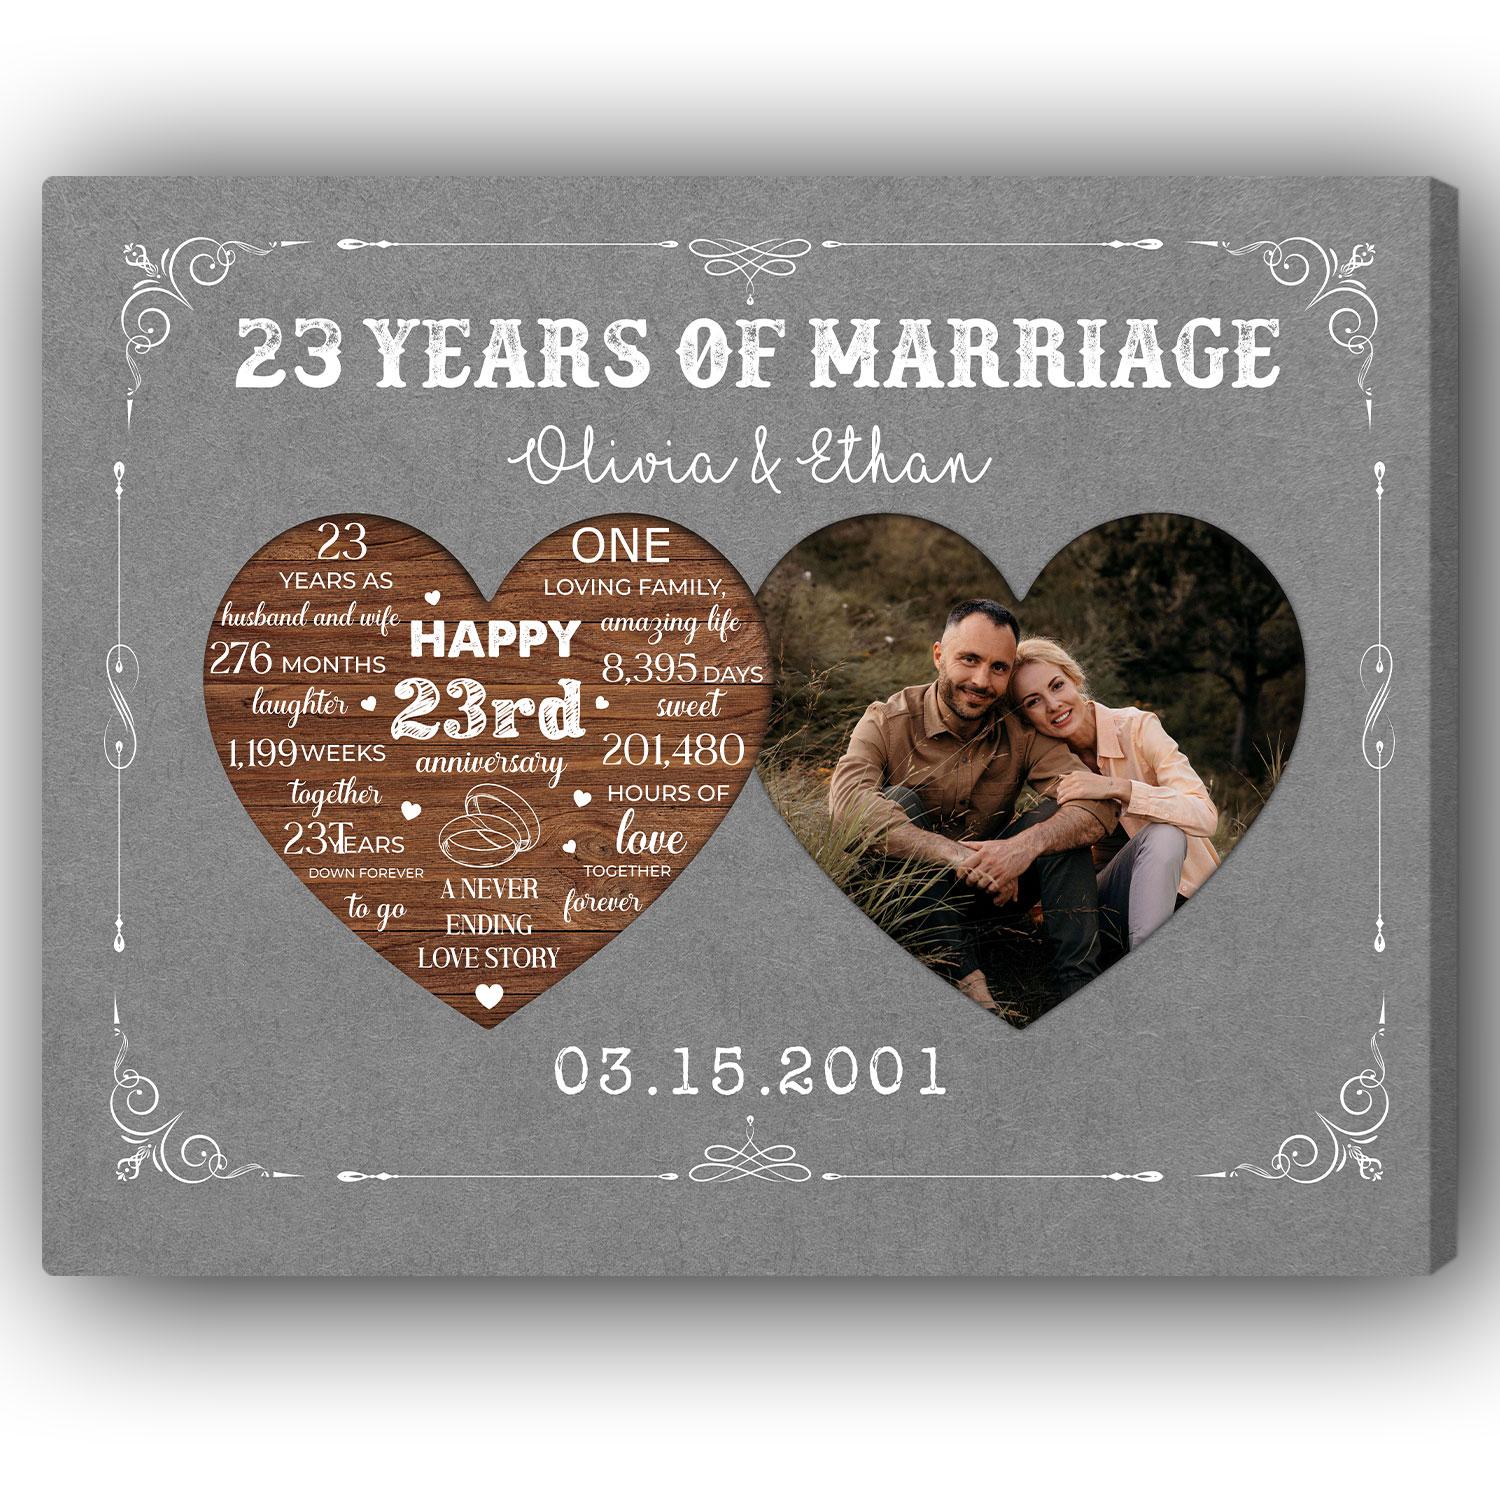 23 Years Of Marriage - Personalized 23 Year Anniversary gift For Husband or Wife - Custom Canvas Print - MyMindfulGifts